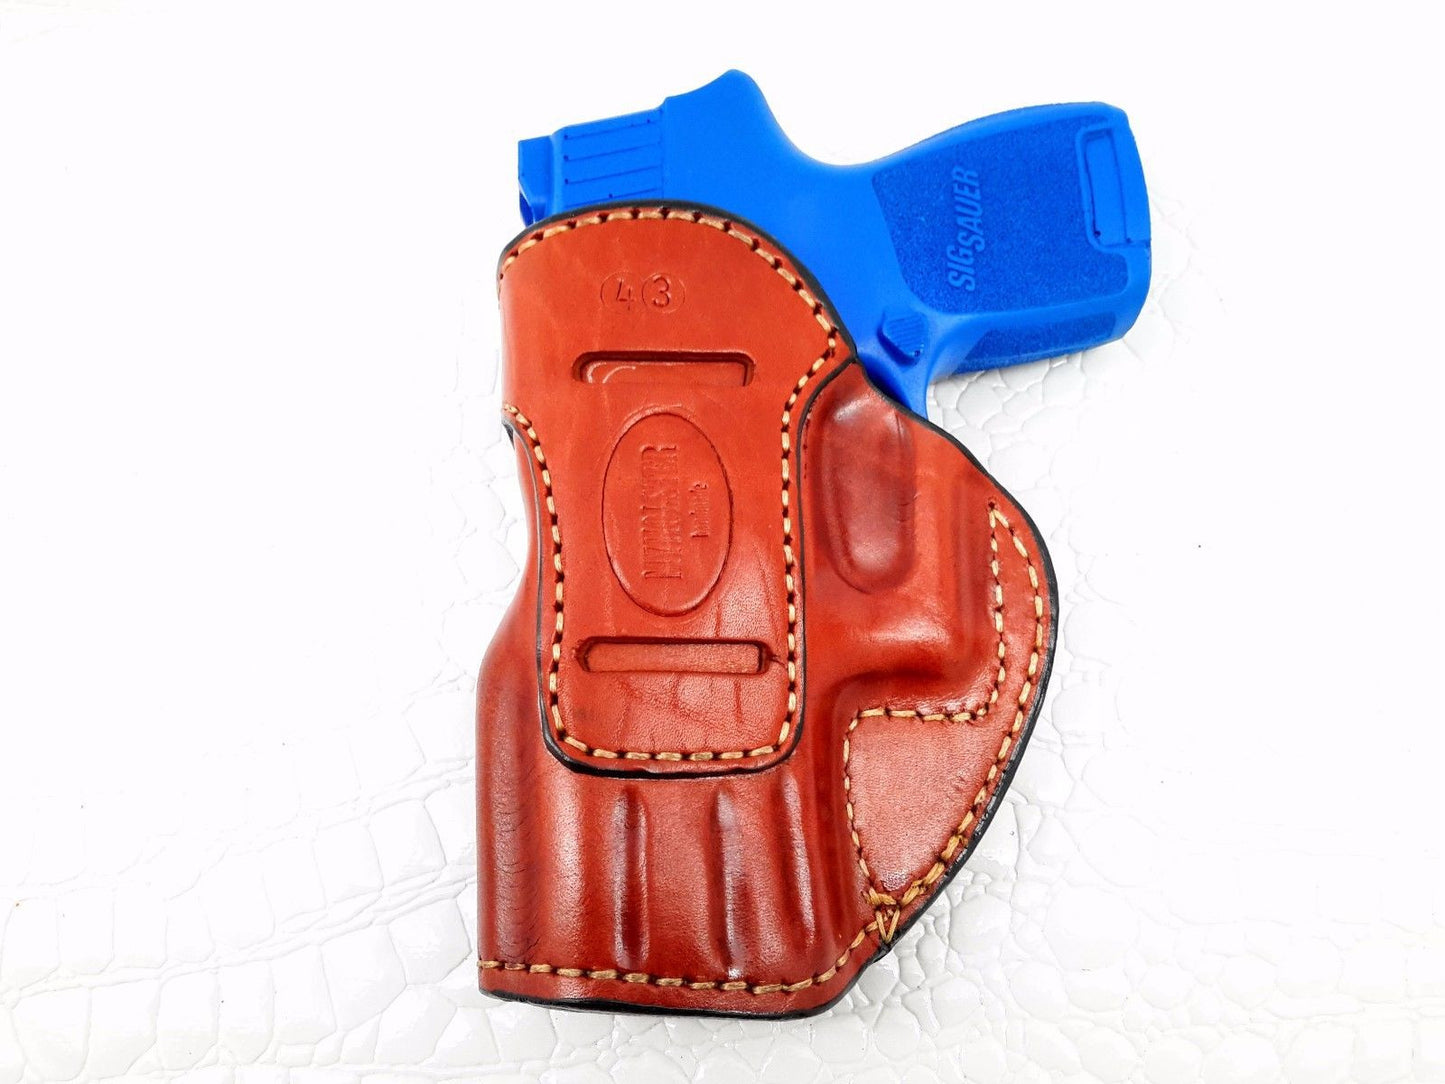 IWB Inside the Waistband holster  for Springfield Armory XD .40 S&W 3 Subcompact